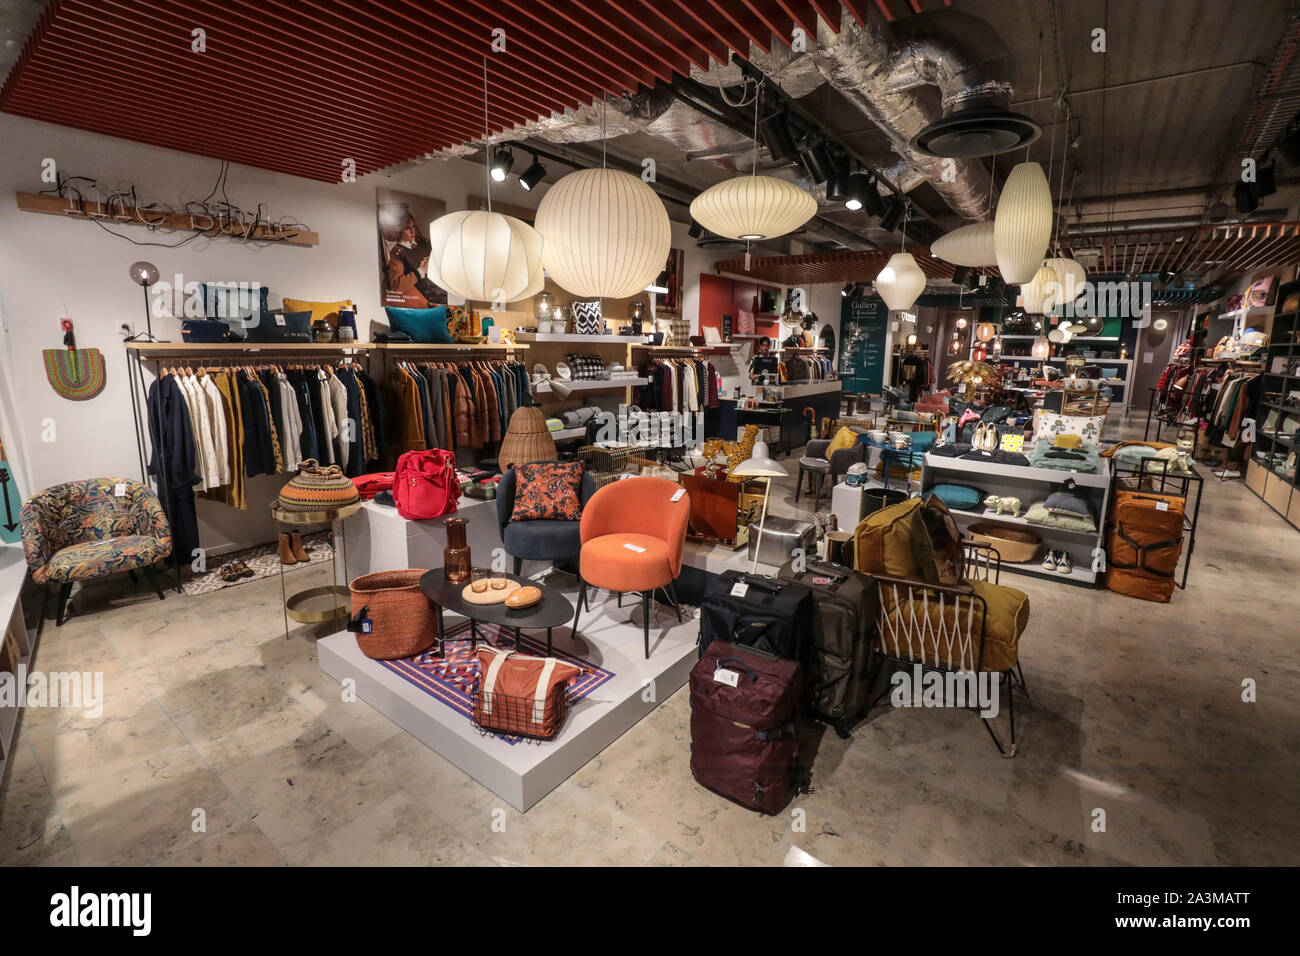 Concept Store High Resolution Stock Photography and Images - Alamy